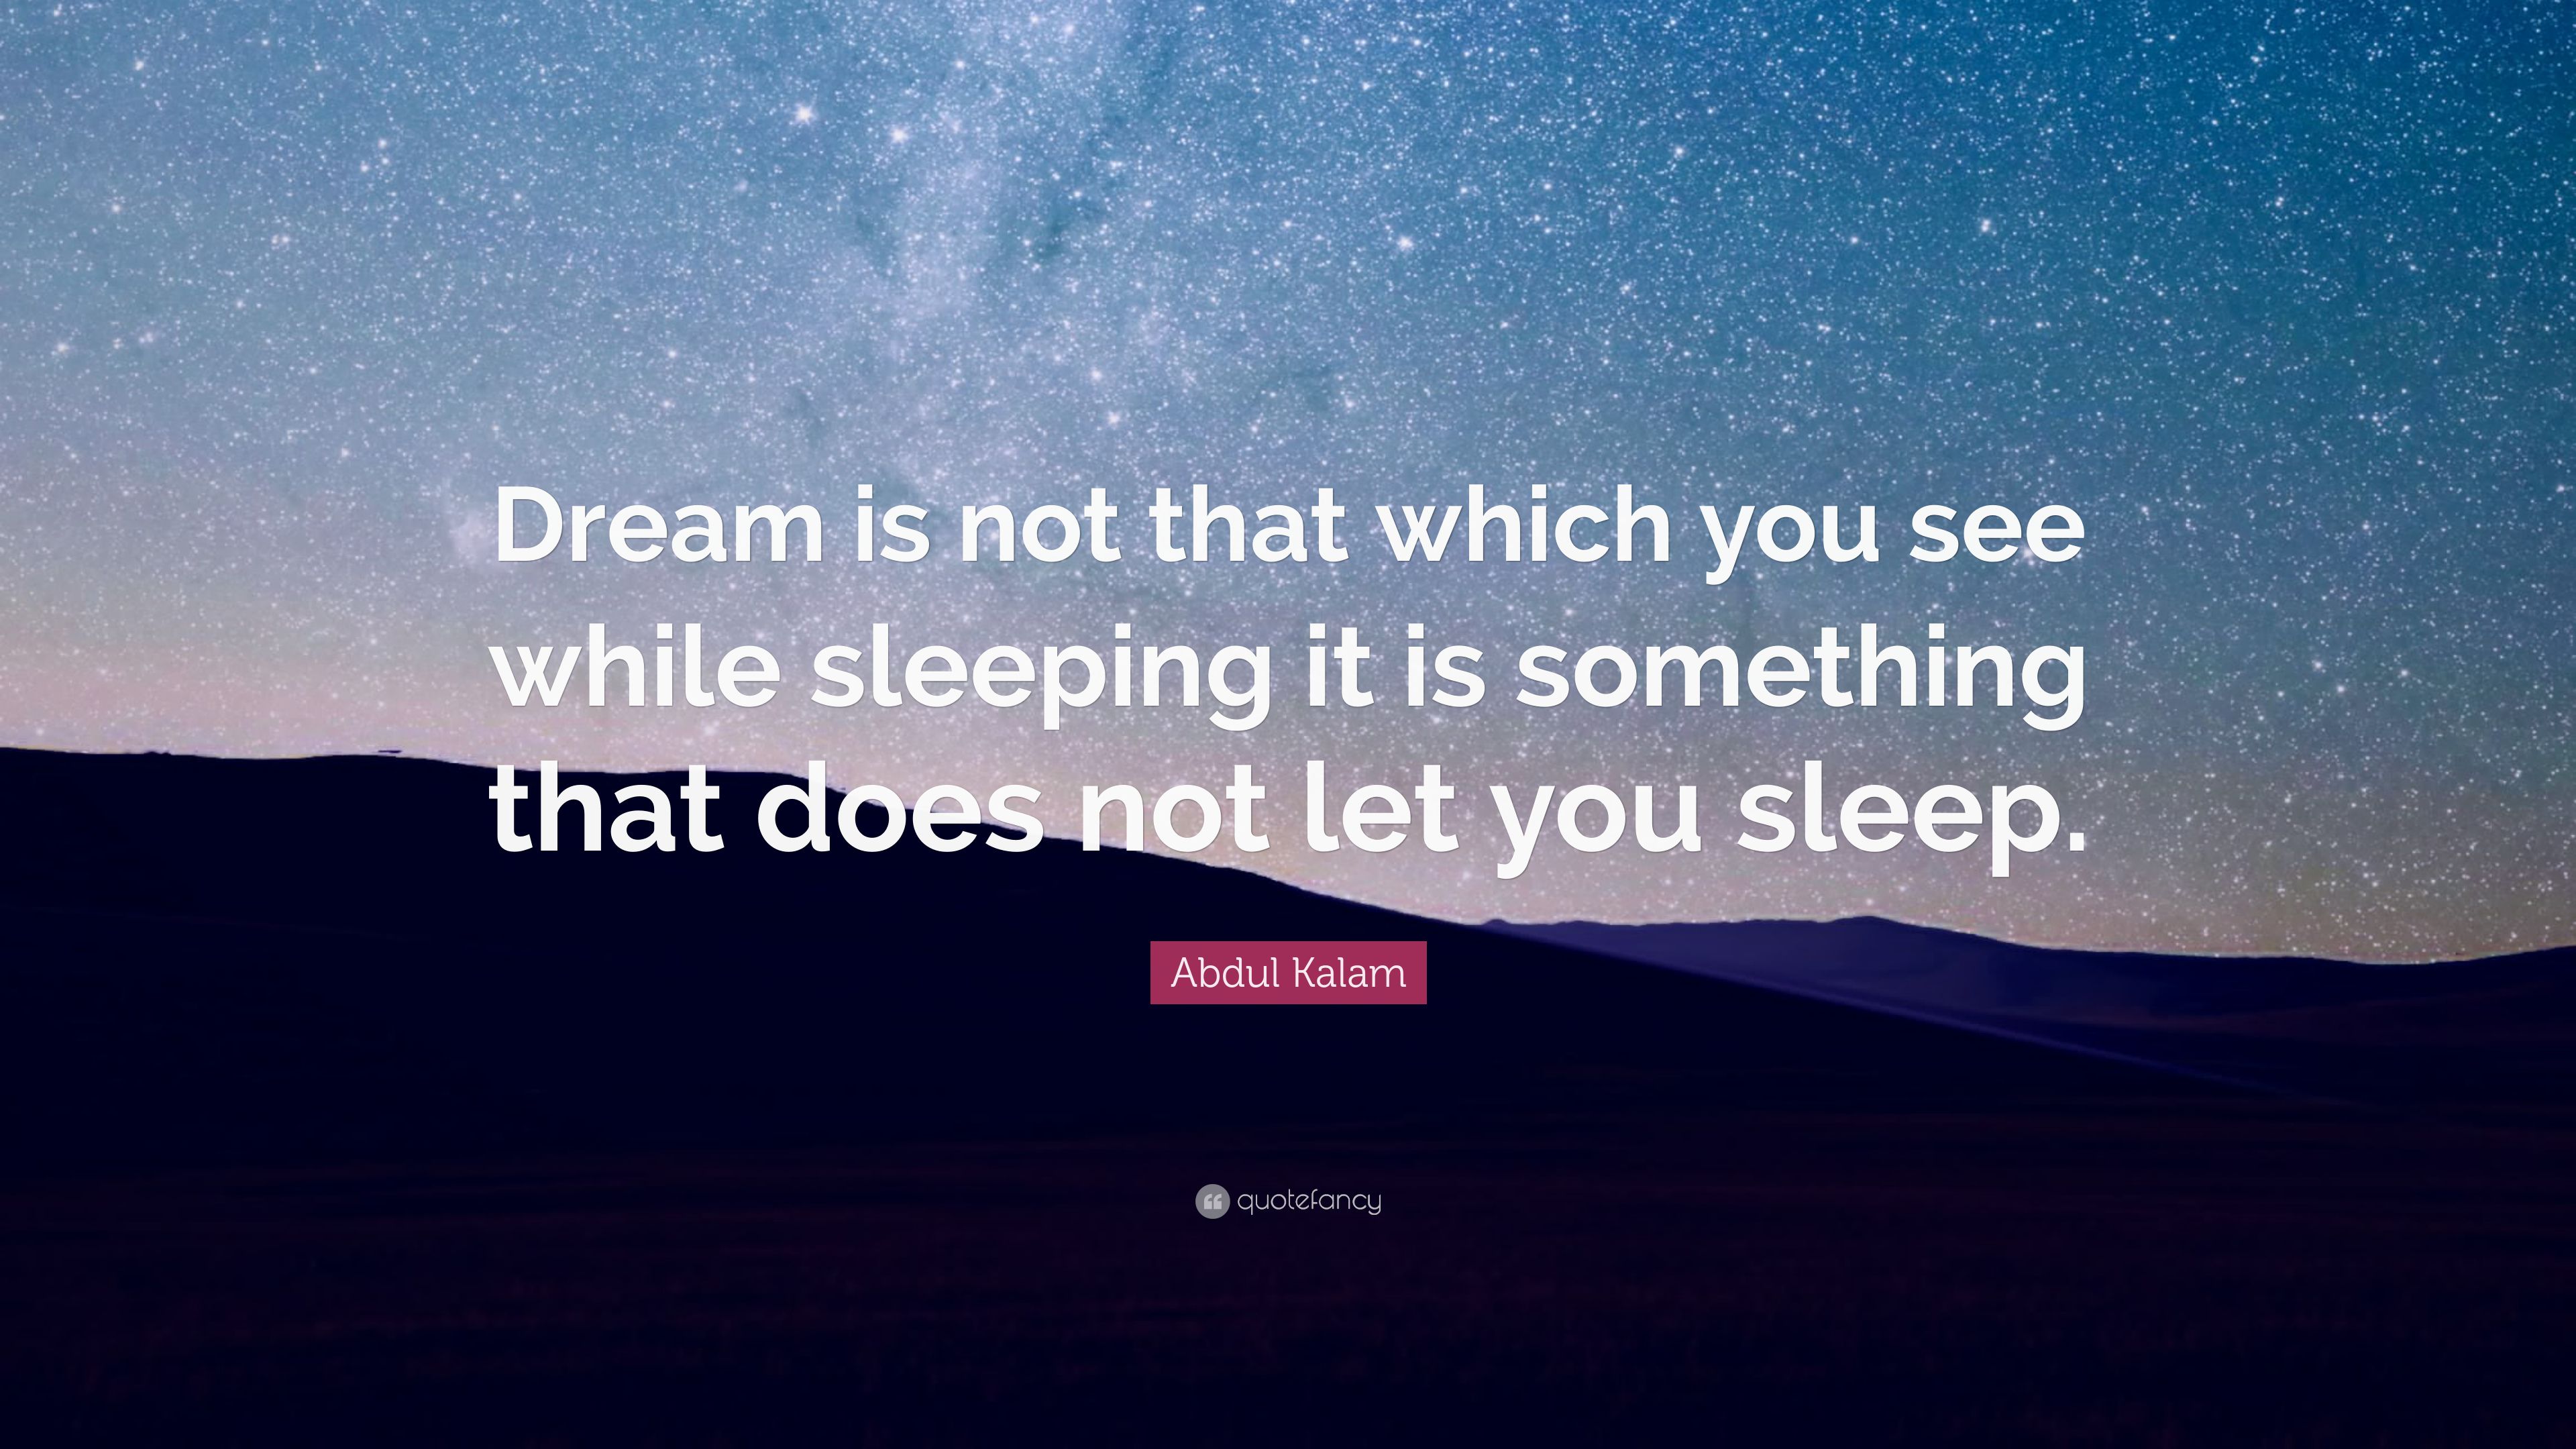 Abdul Kalam Quote: “Dream is not that which you see while sleeping it is something that does not let you sleep.” (17 wallpaper)